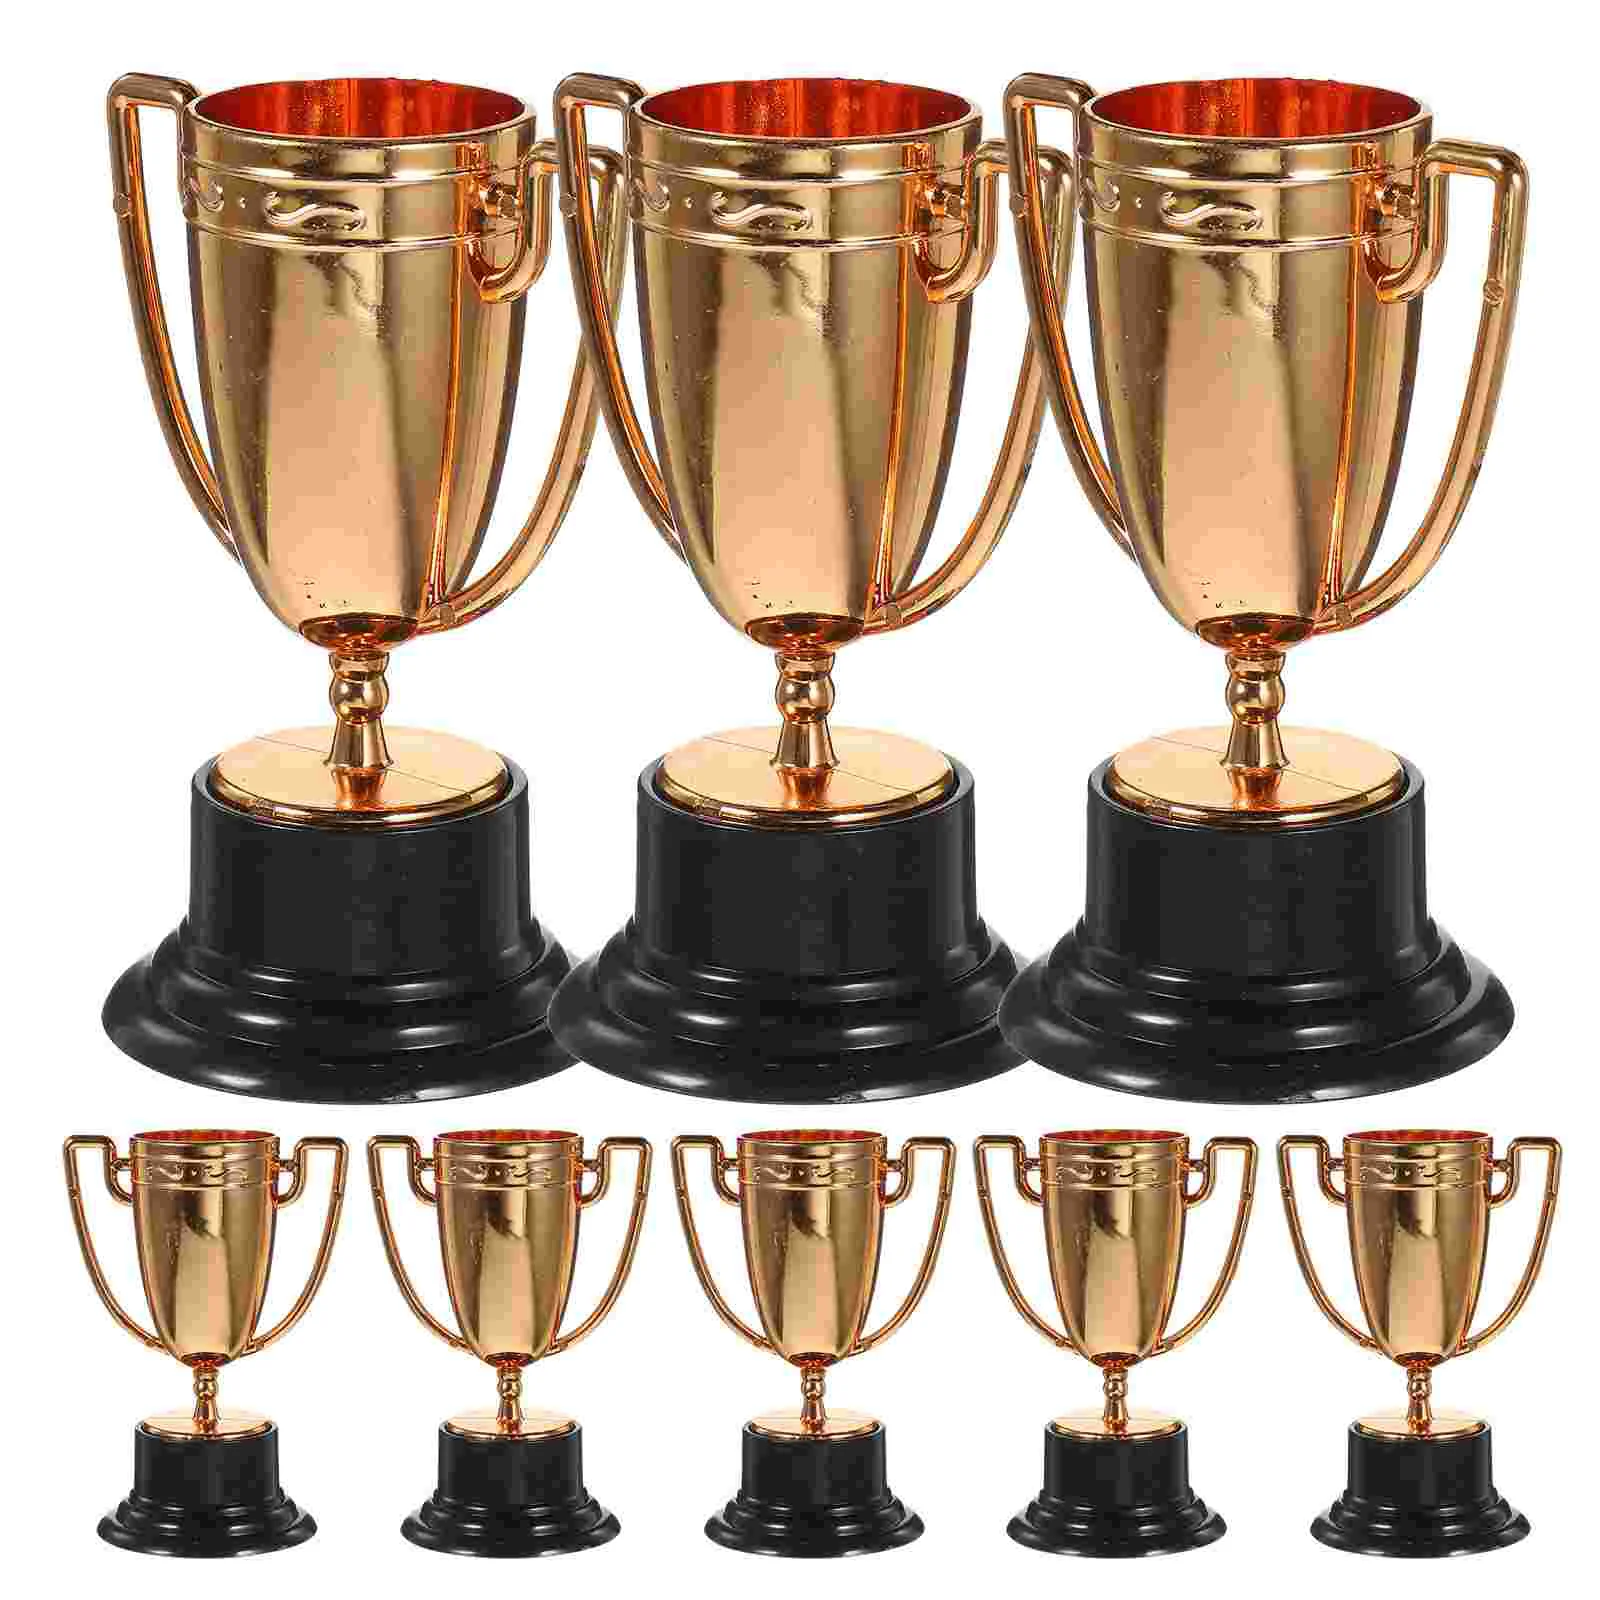 

10 Pcs Mini Trophy Award Trophies Adult Toy Aldult Cup Game Awards Soccer for Kids Plastic Child Toys